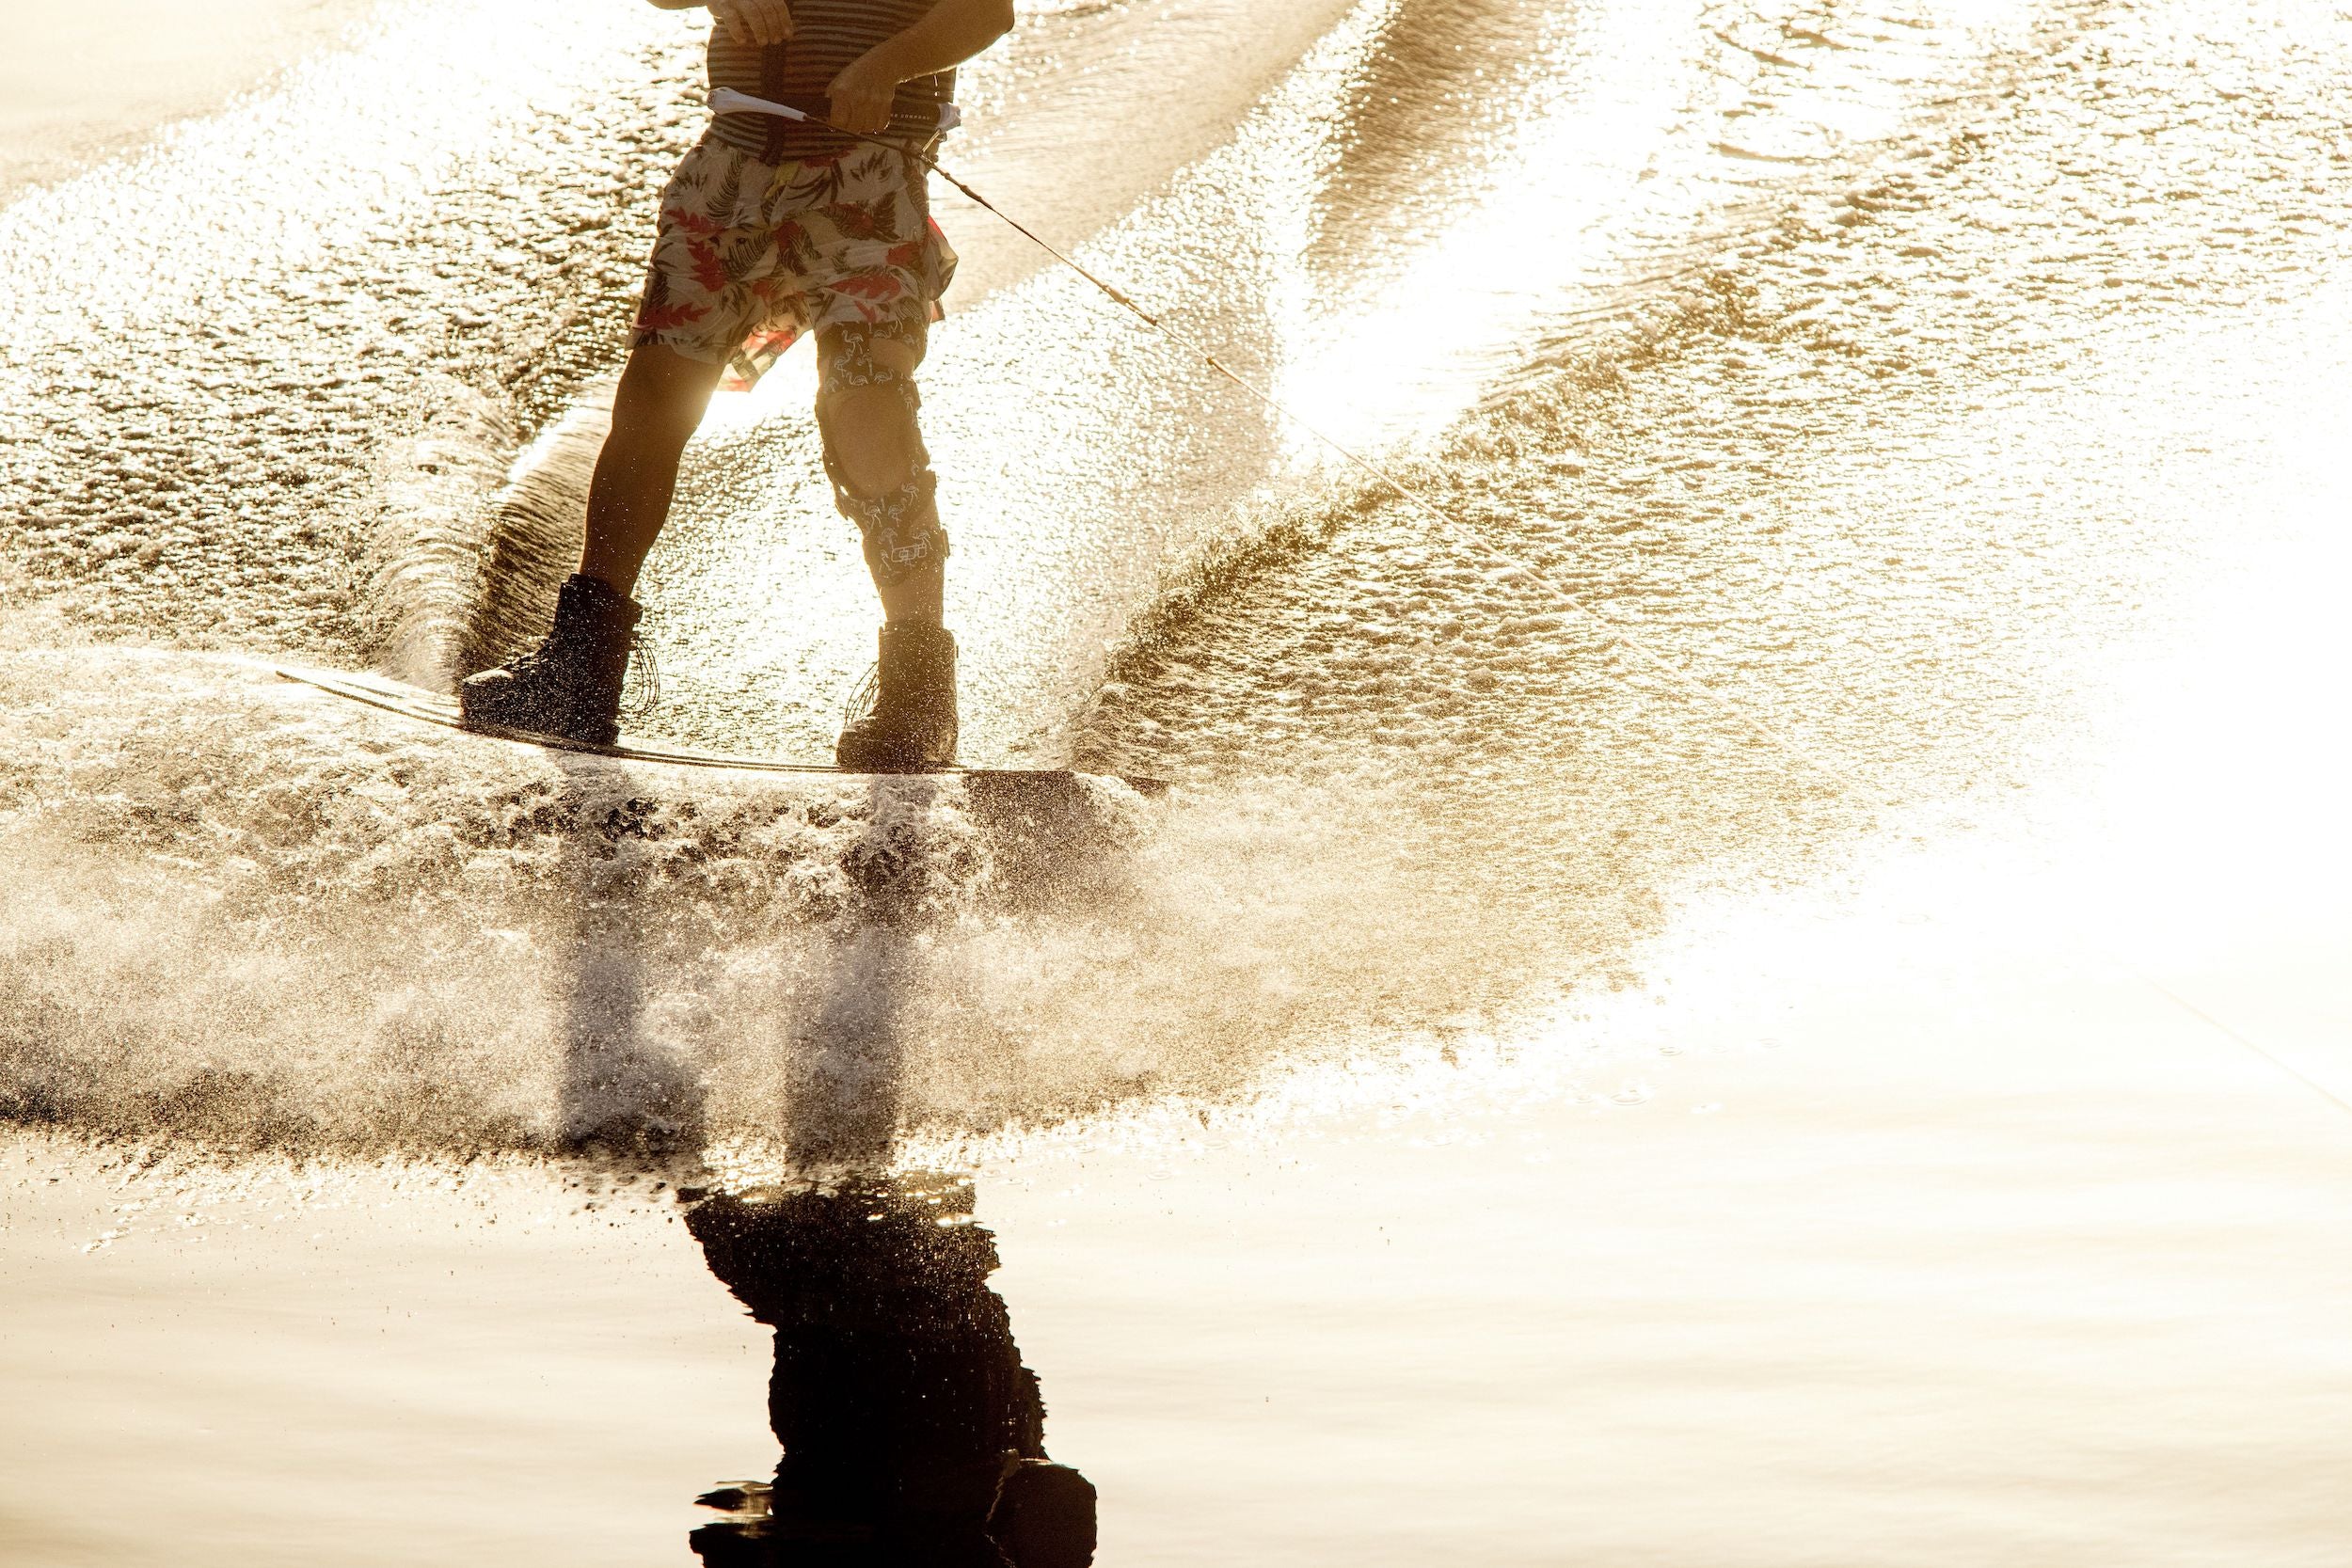 A person riding a water ski in the water, equipped with Autolock technology and using a Ronix 2024 Parks Boots.